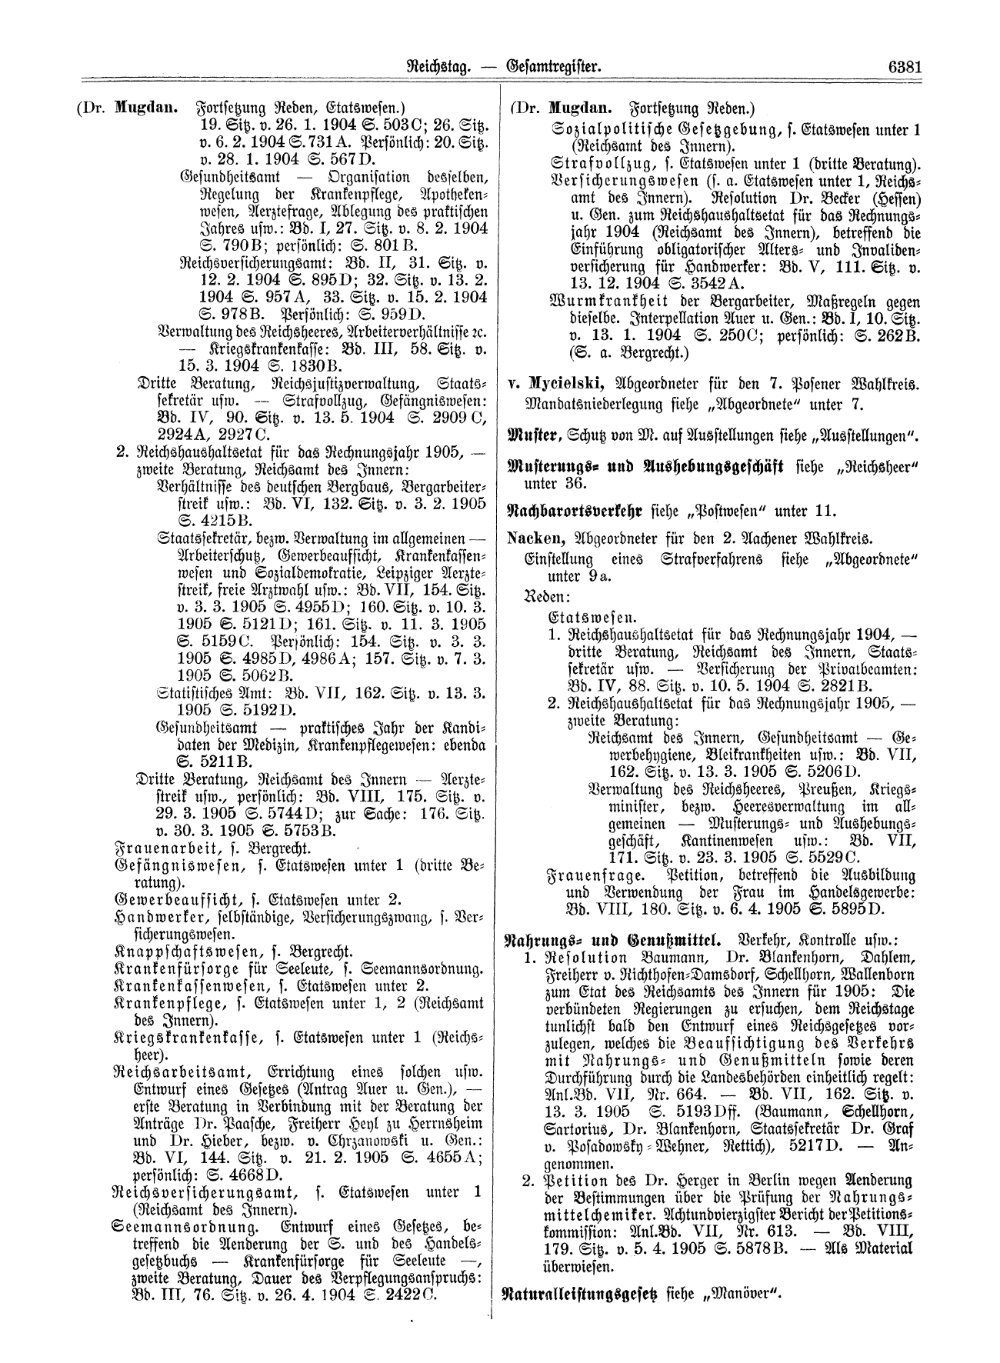 Scan of page 6381